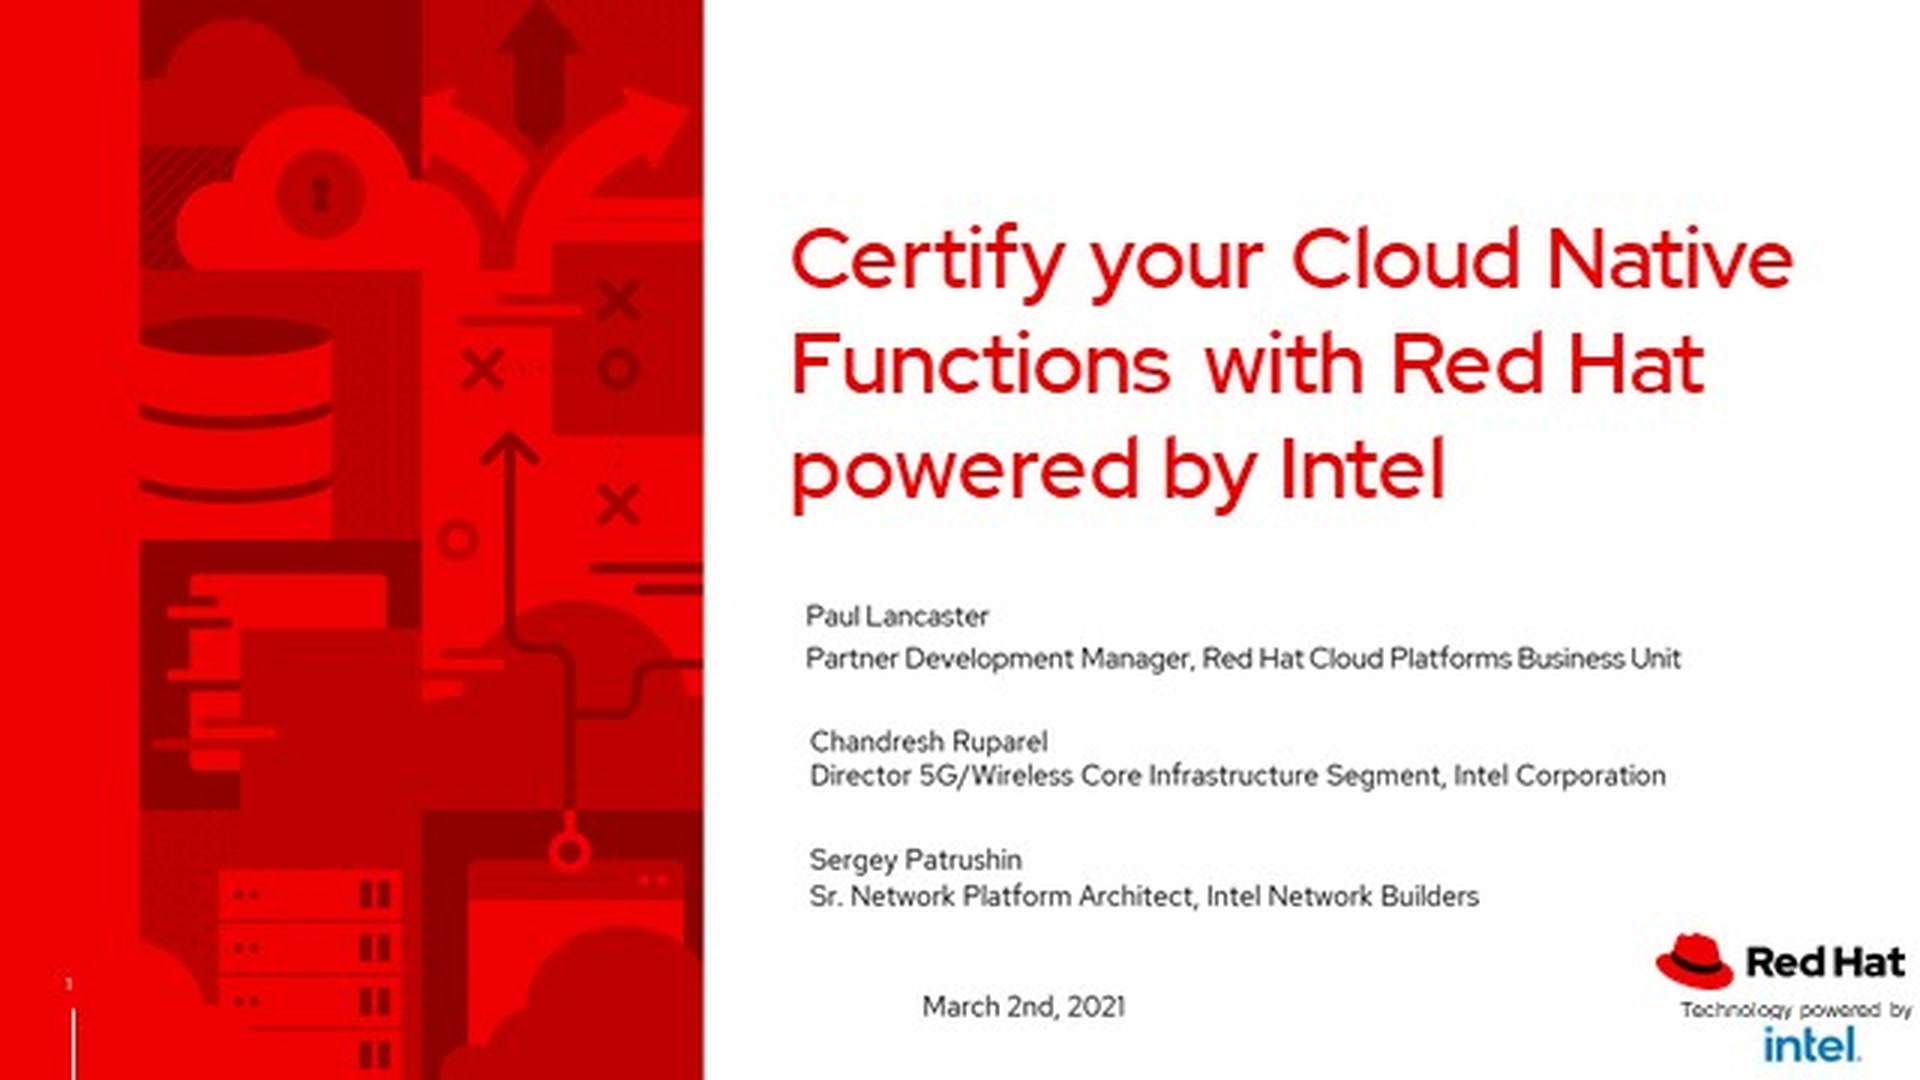 Certify your Cloud Native Functions with Red Hat and Intel